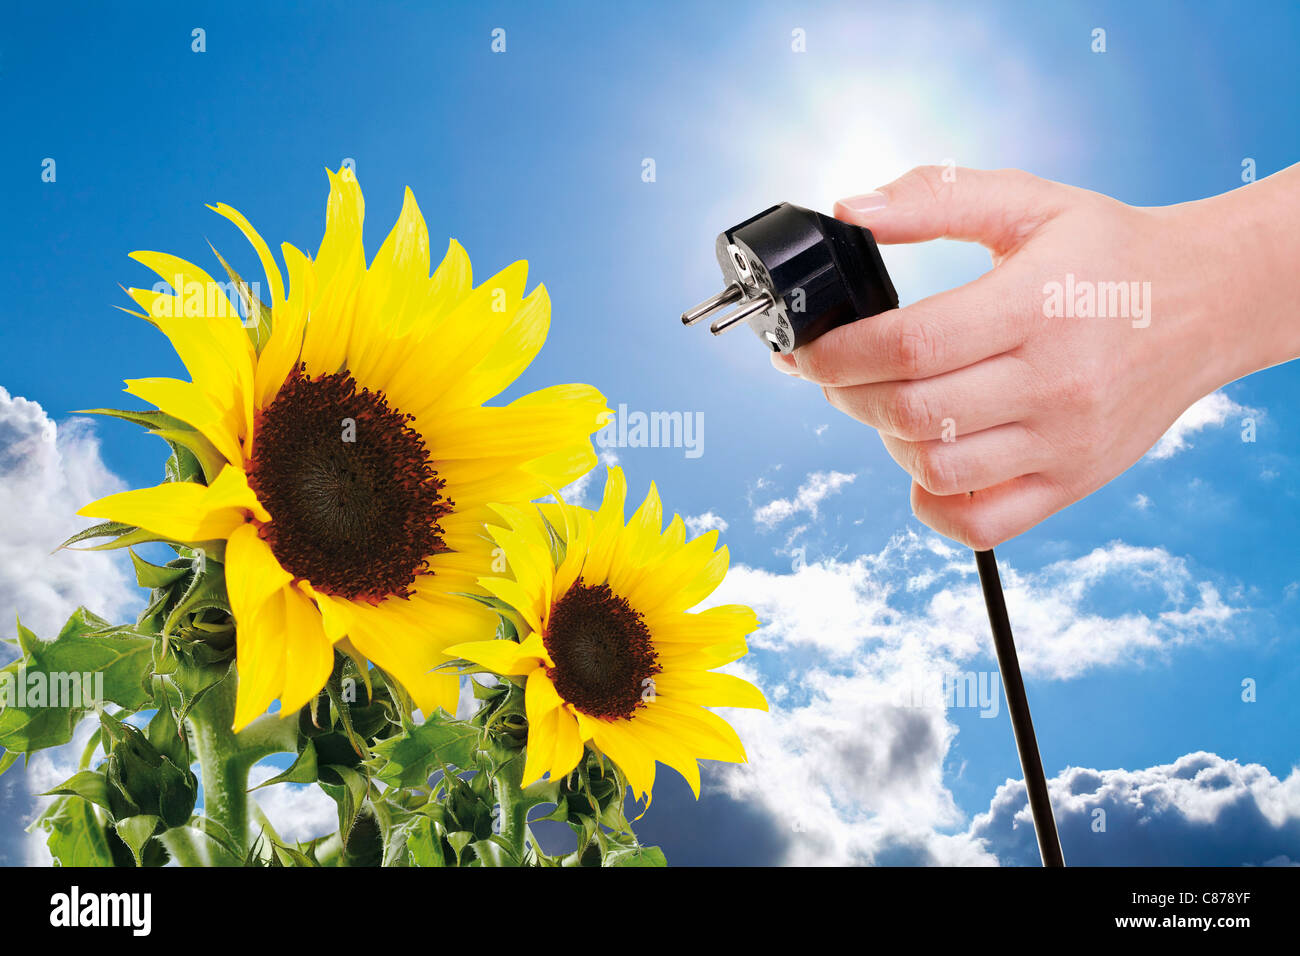 Hand of woman holding power plug next to sunflowers against blue sky and sun, close up Stock Photo